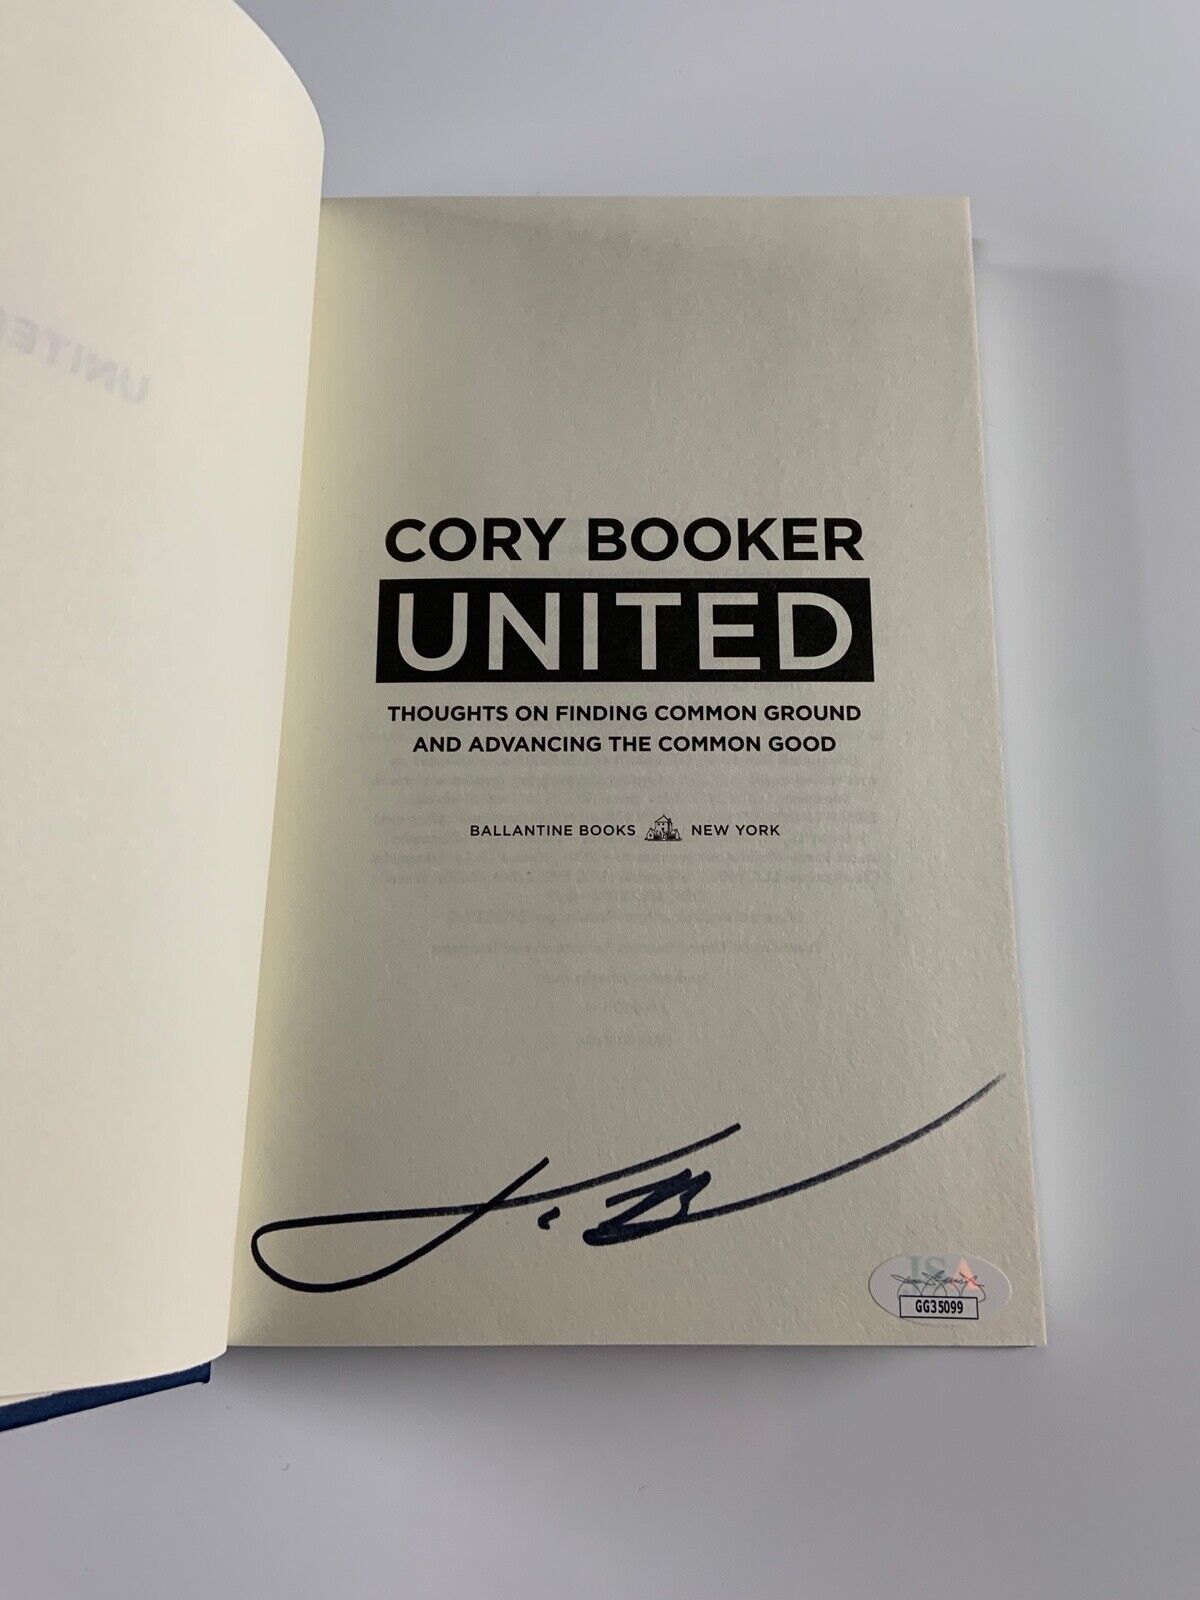 Cory Booker Signed Autograph Book JSA COA First Edition United